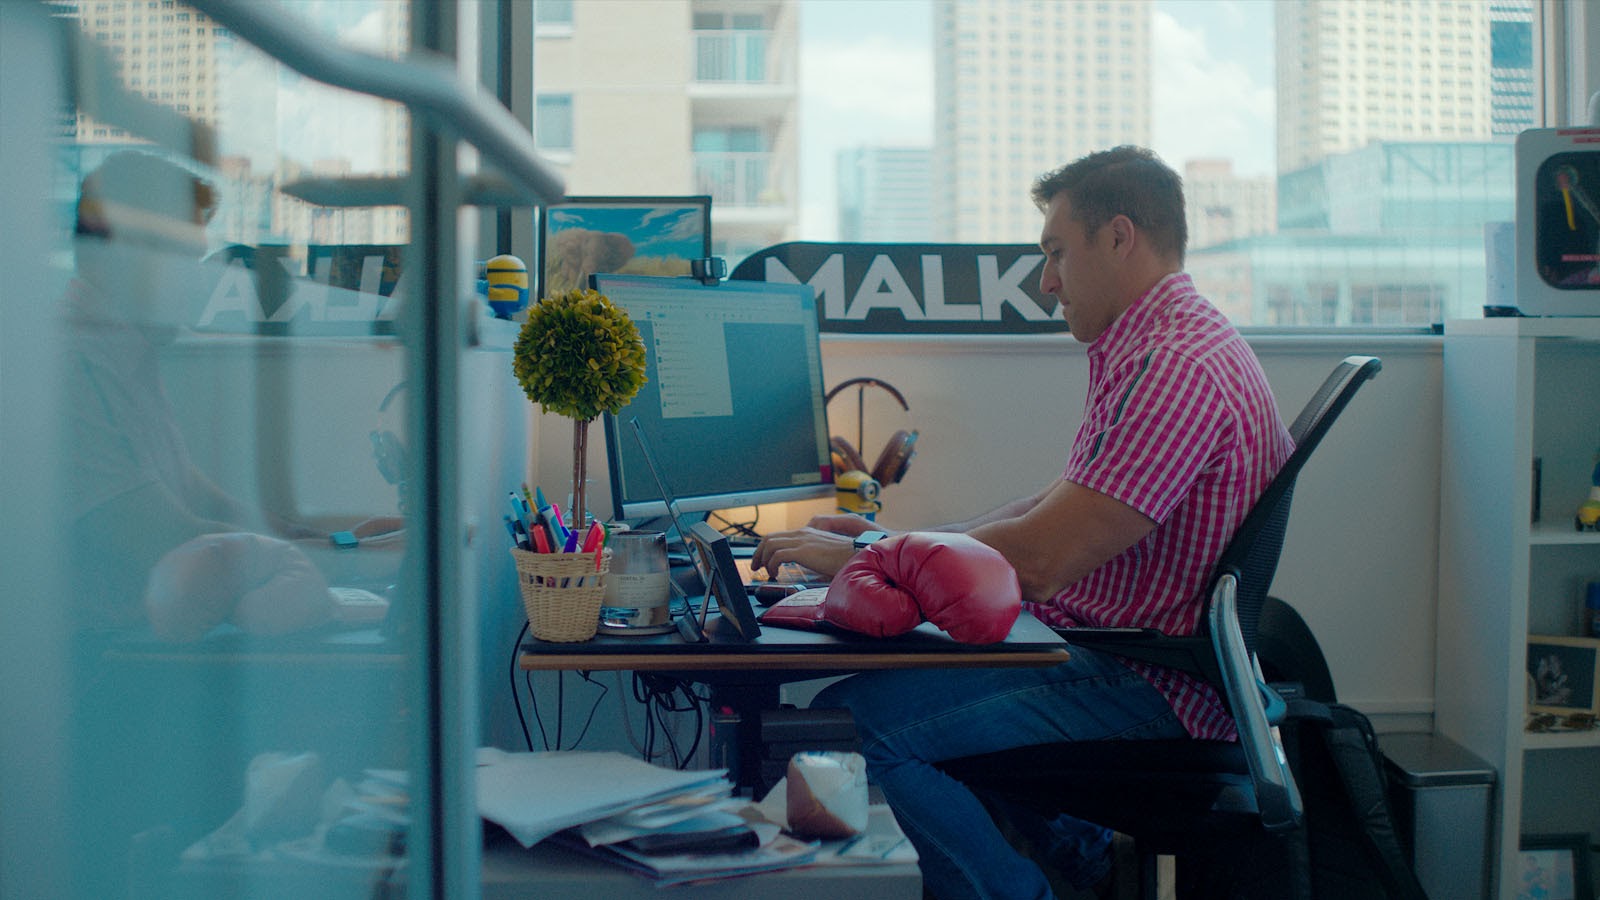 Jeff Frommer, president of MALKA, at his desk in New Jersey.